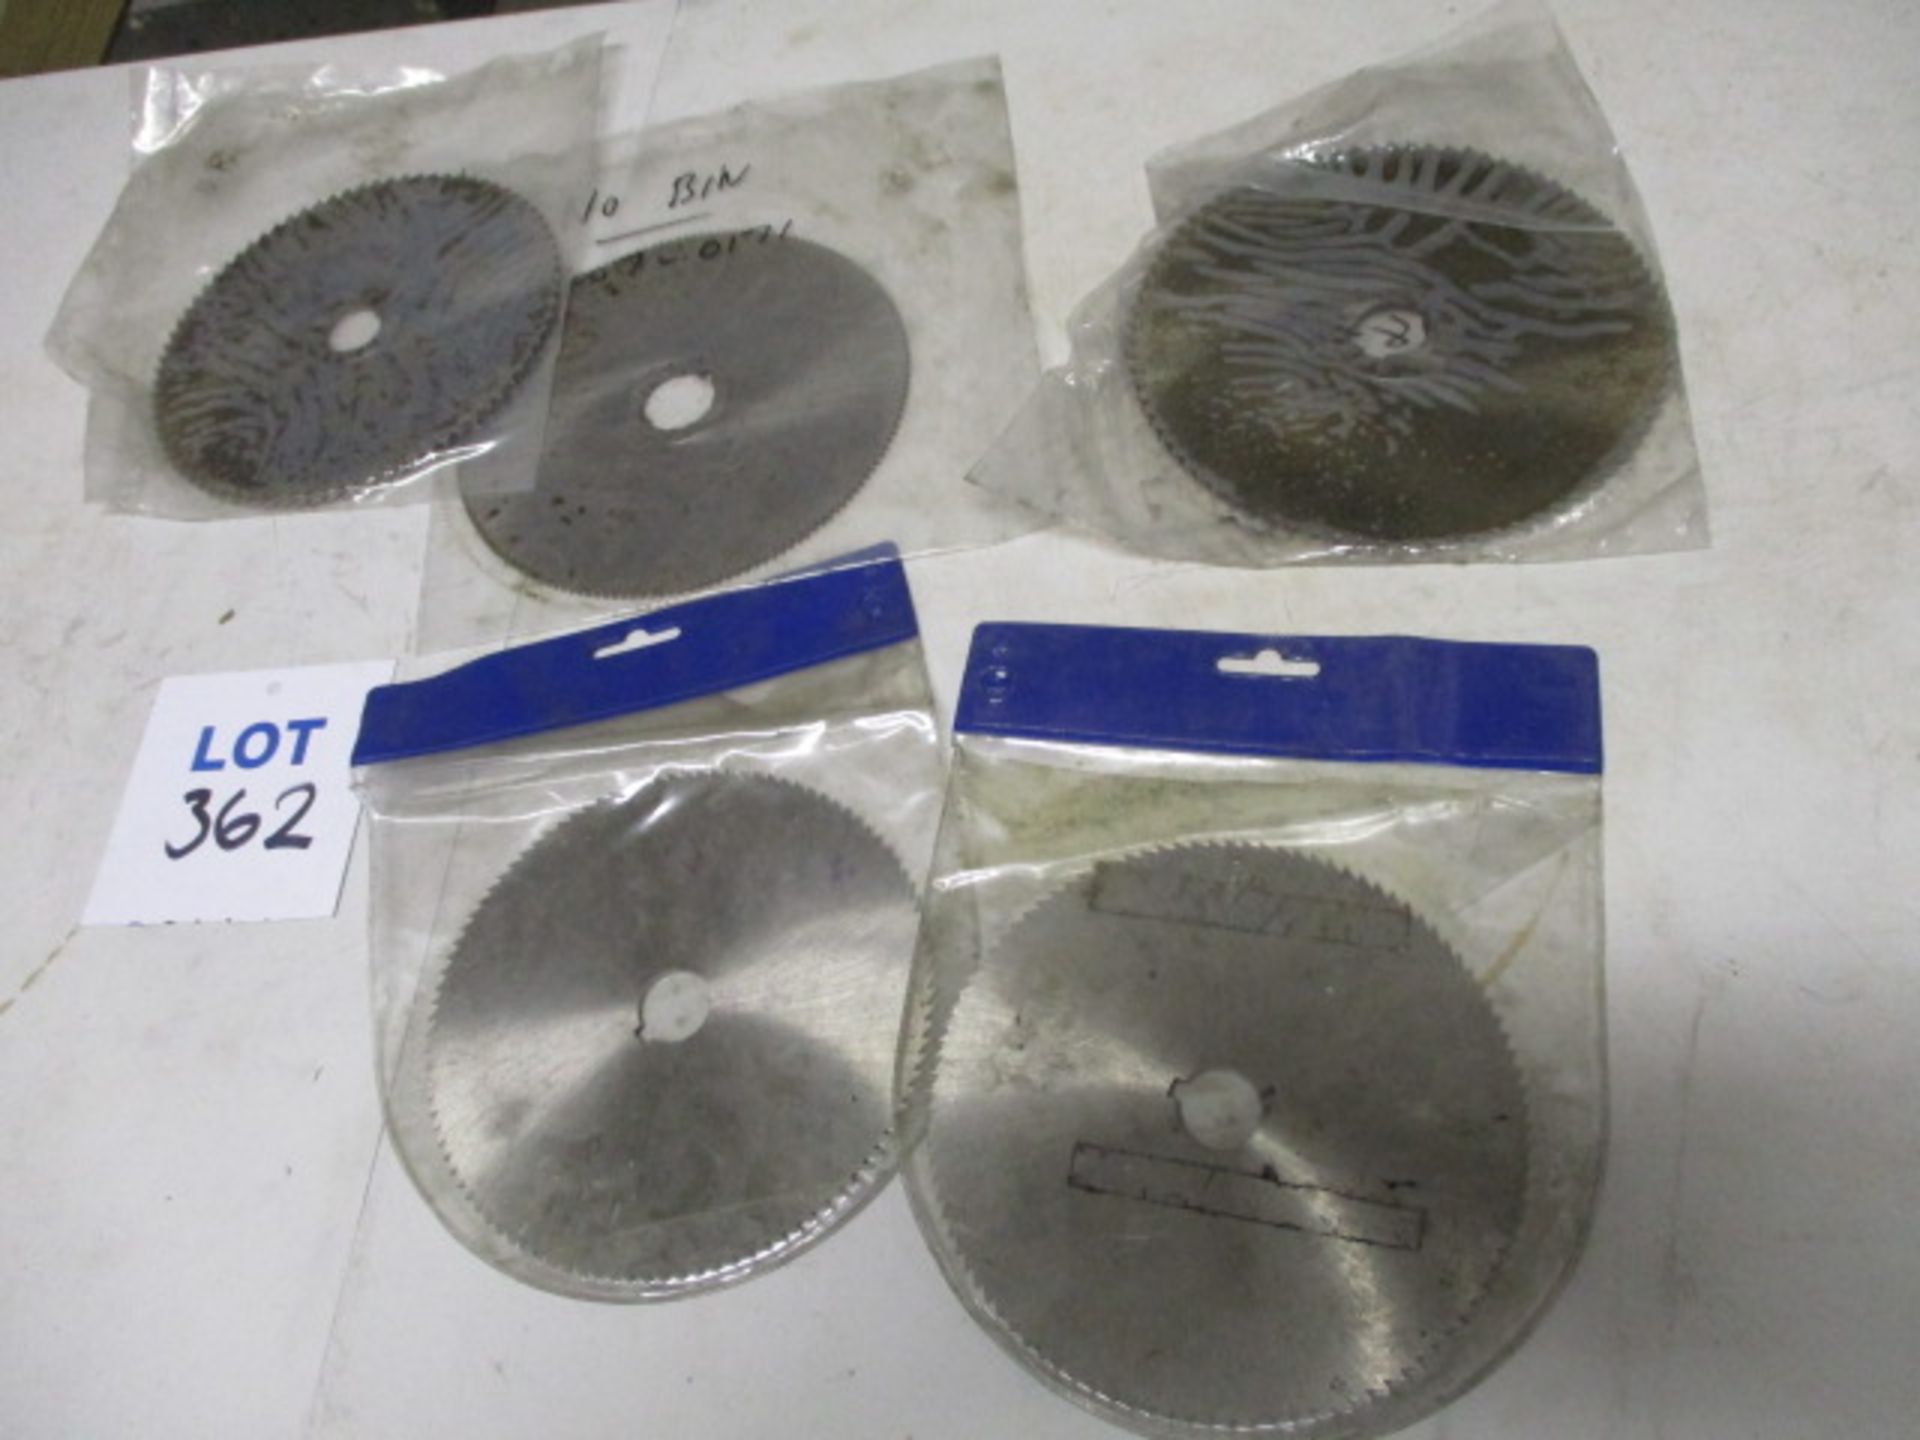 (10) 200mm Dia., x 32mm Bore, Assorted HSS Slitting Saws (Unused) - Image 2 of 3